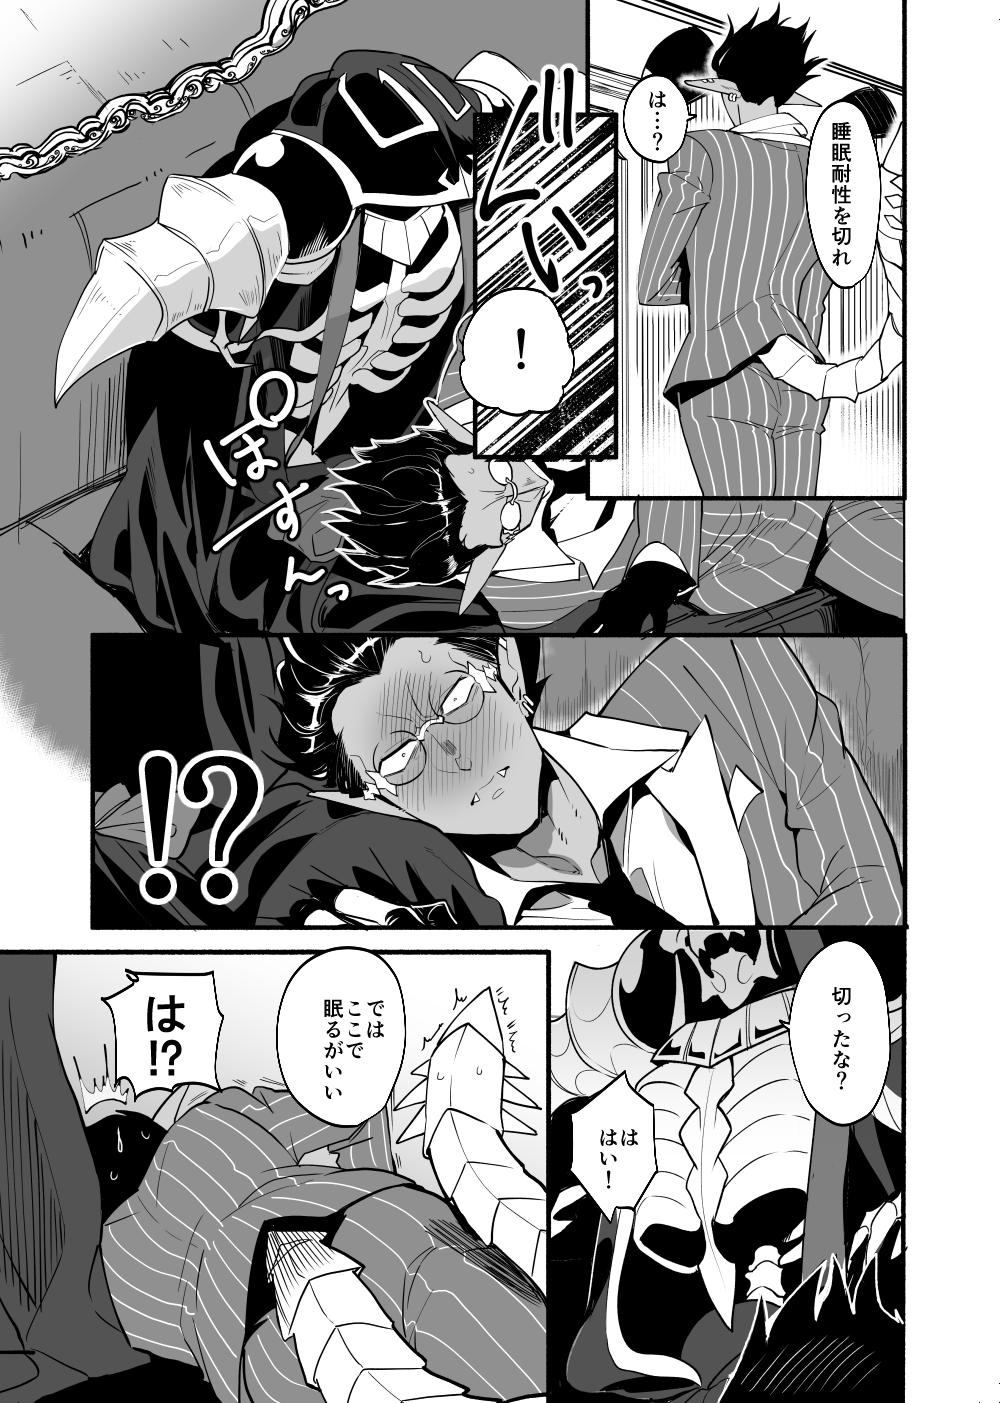 Belly Nennen Korori - Overlord Culo - Page 4